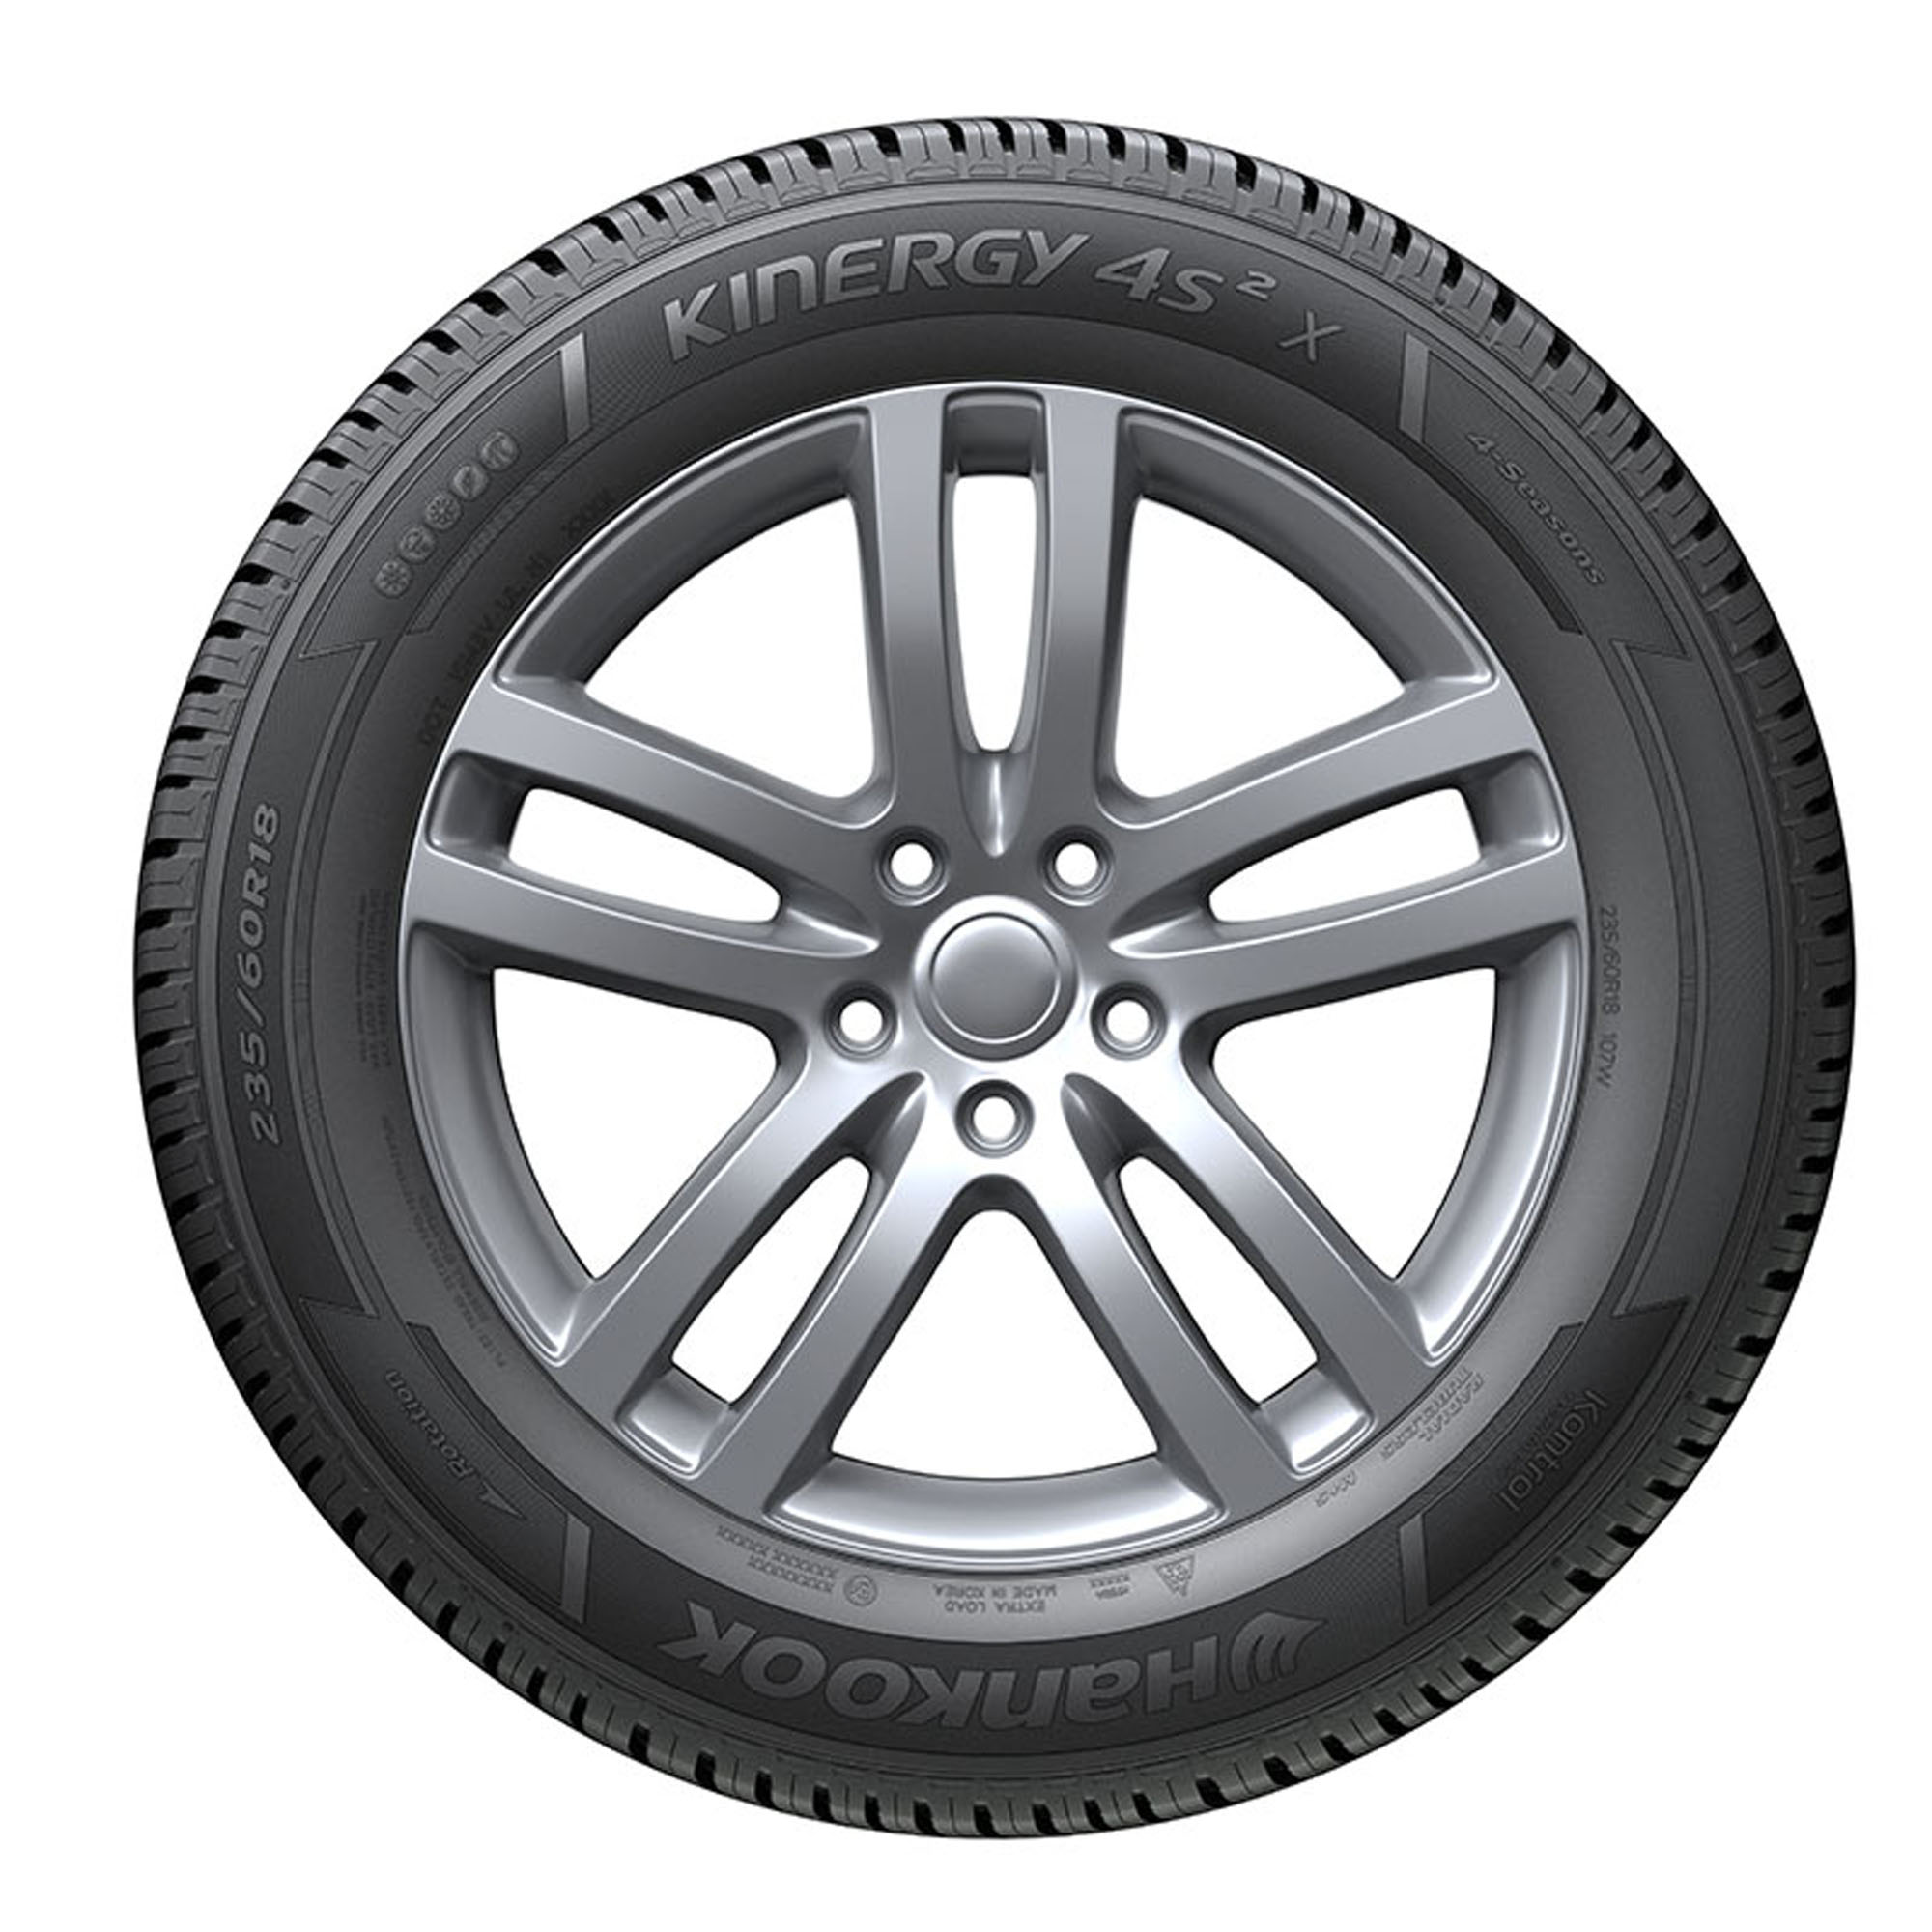 Hankook Kinergy 4S2 X (H750A) All Weather 225/60R17 99H SUV/Crossover Tire - image 2 of 4